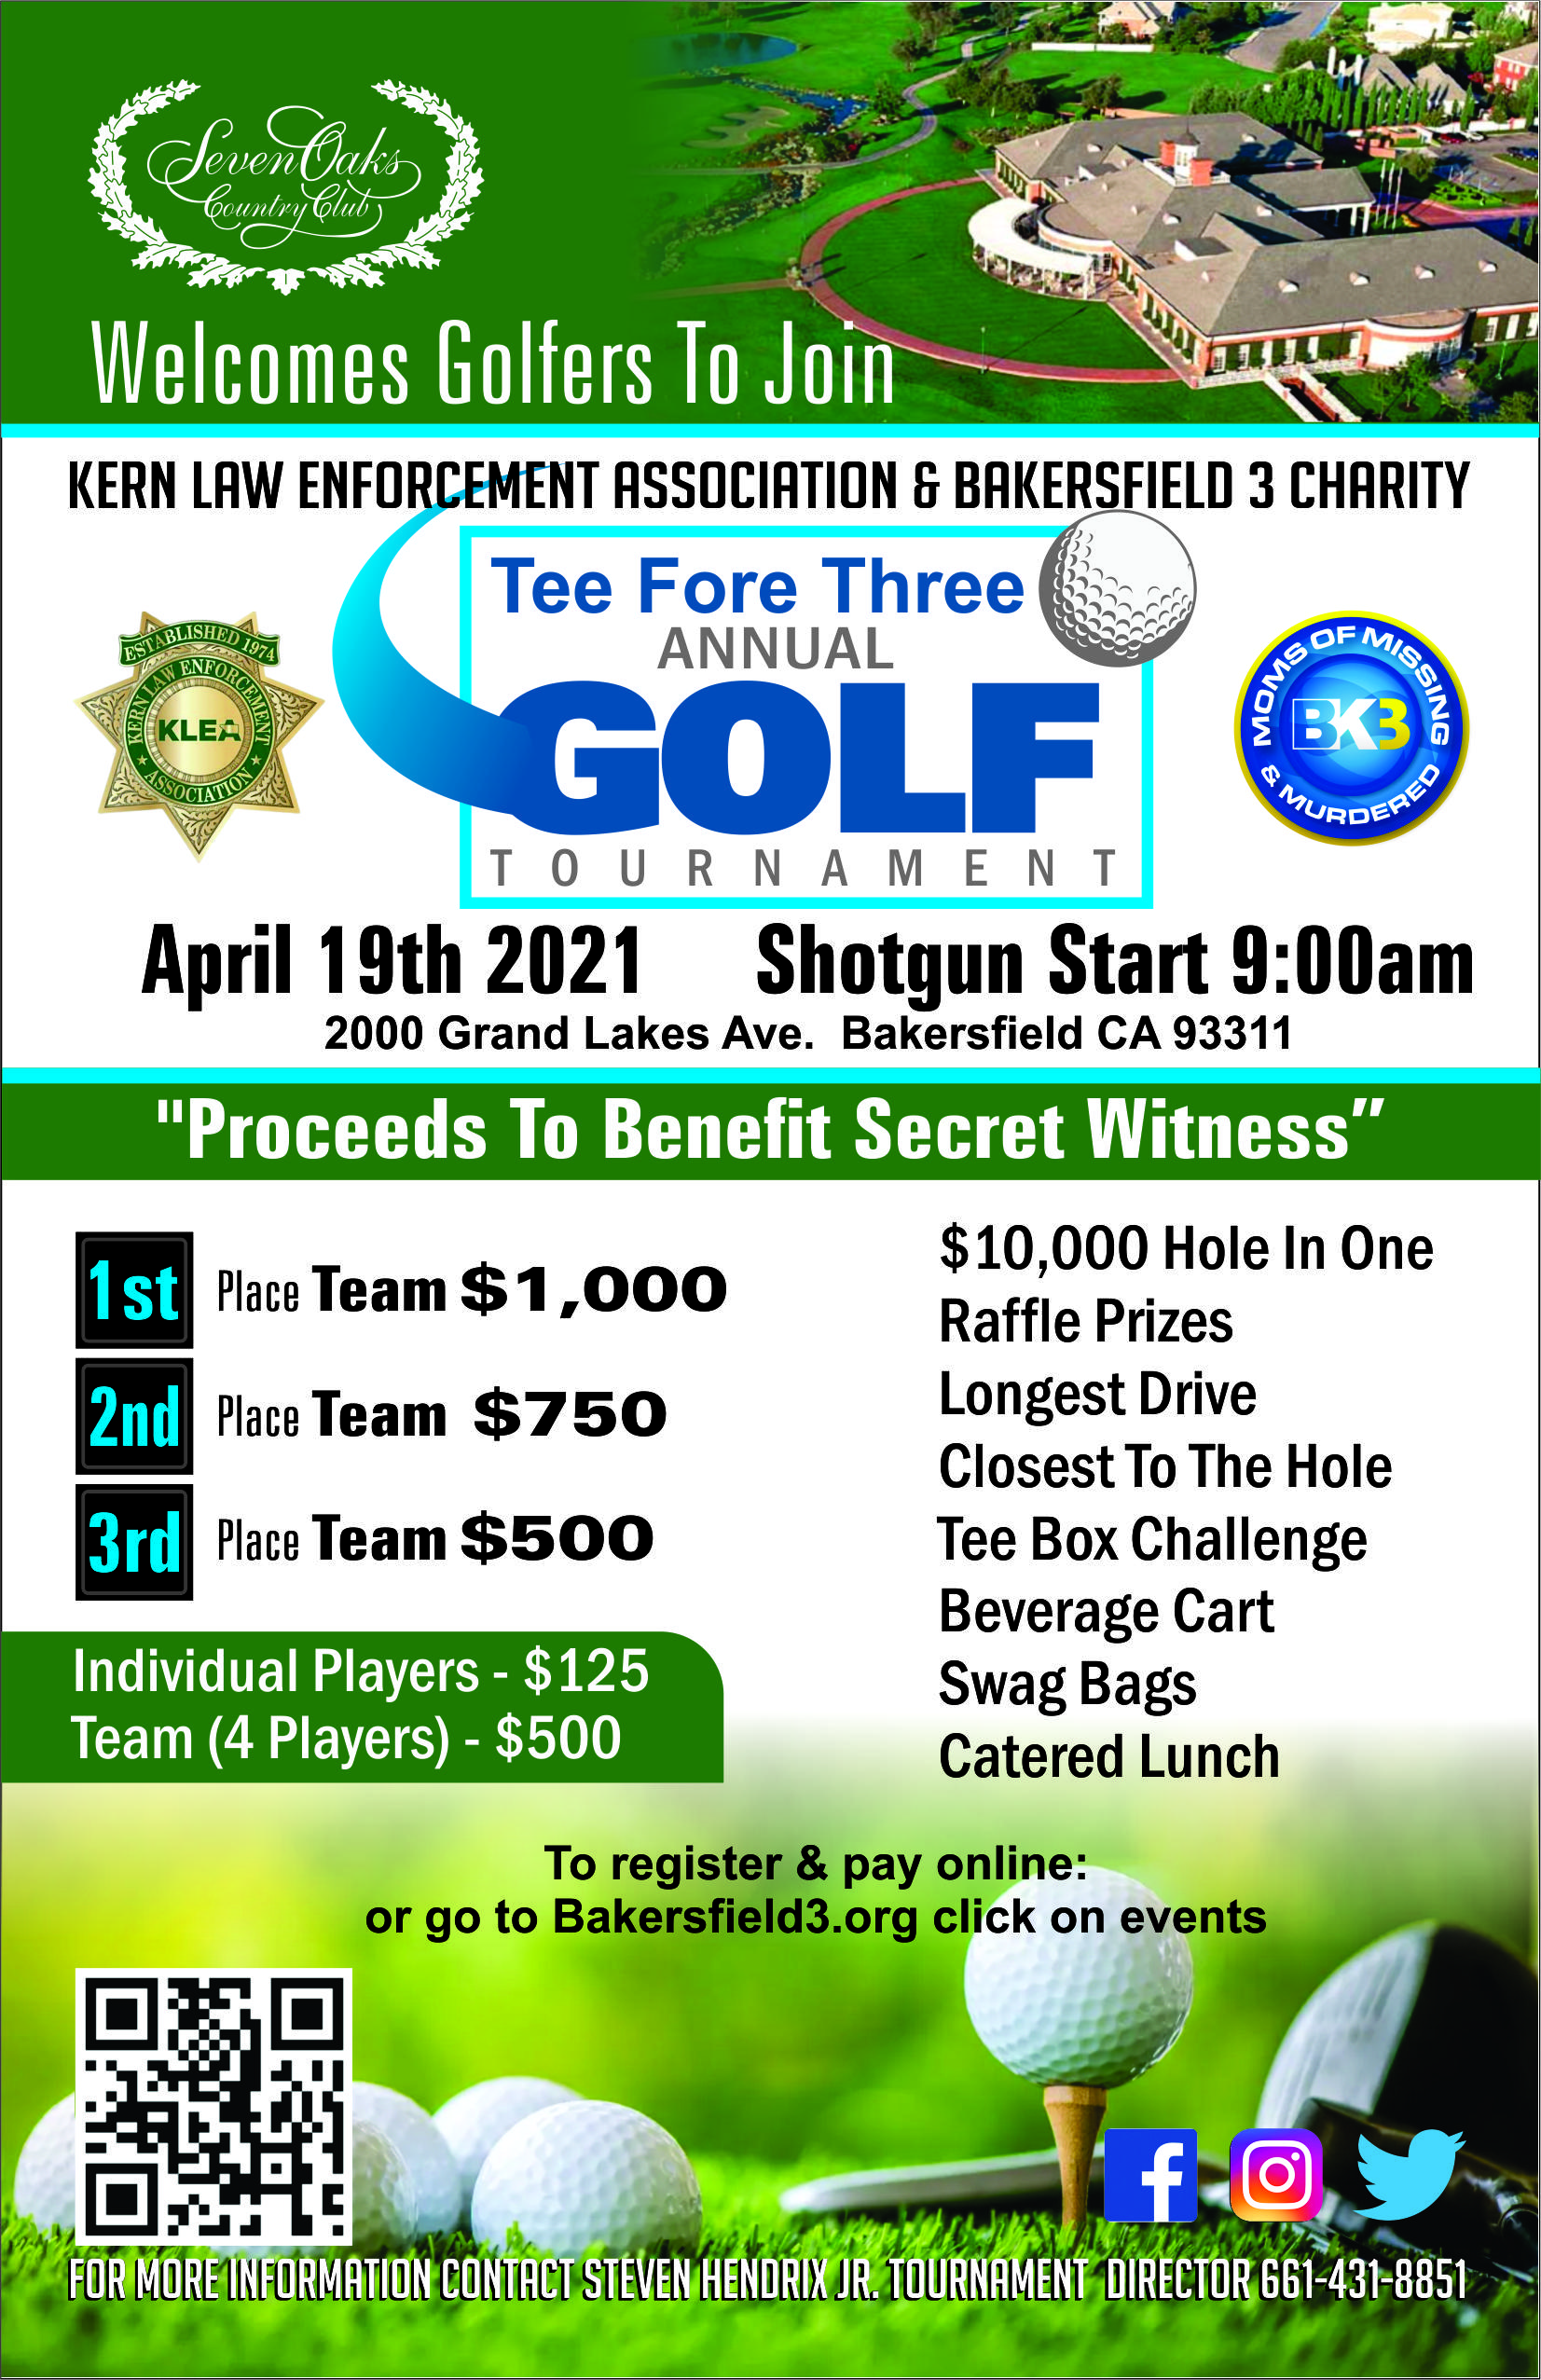 KLEA and Bakersfield 3 Charity Annual "Tee Fore Three" Golf Tournament